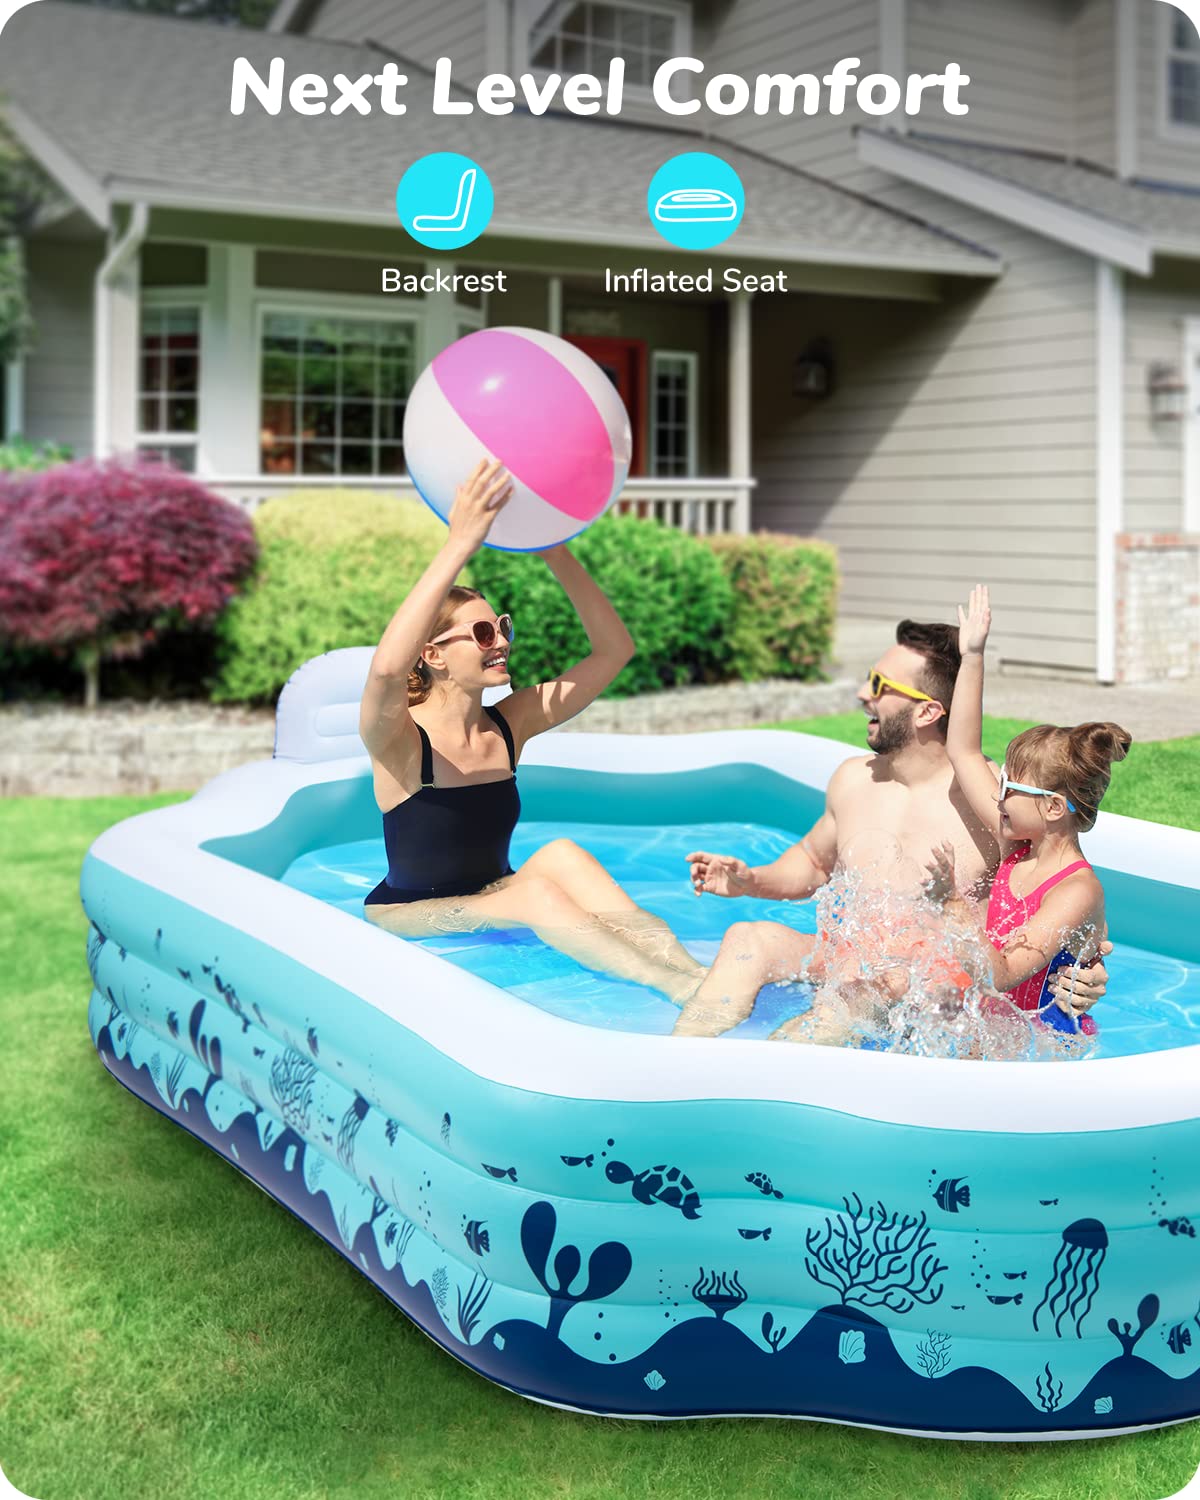 Valwix Inflatable Swimming Pool, Full-Sized Roma Shape, Ages 3+, Outdoor Garden Backyard Family Pool